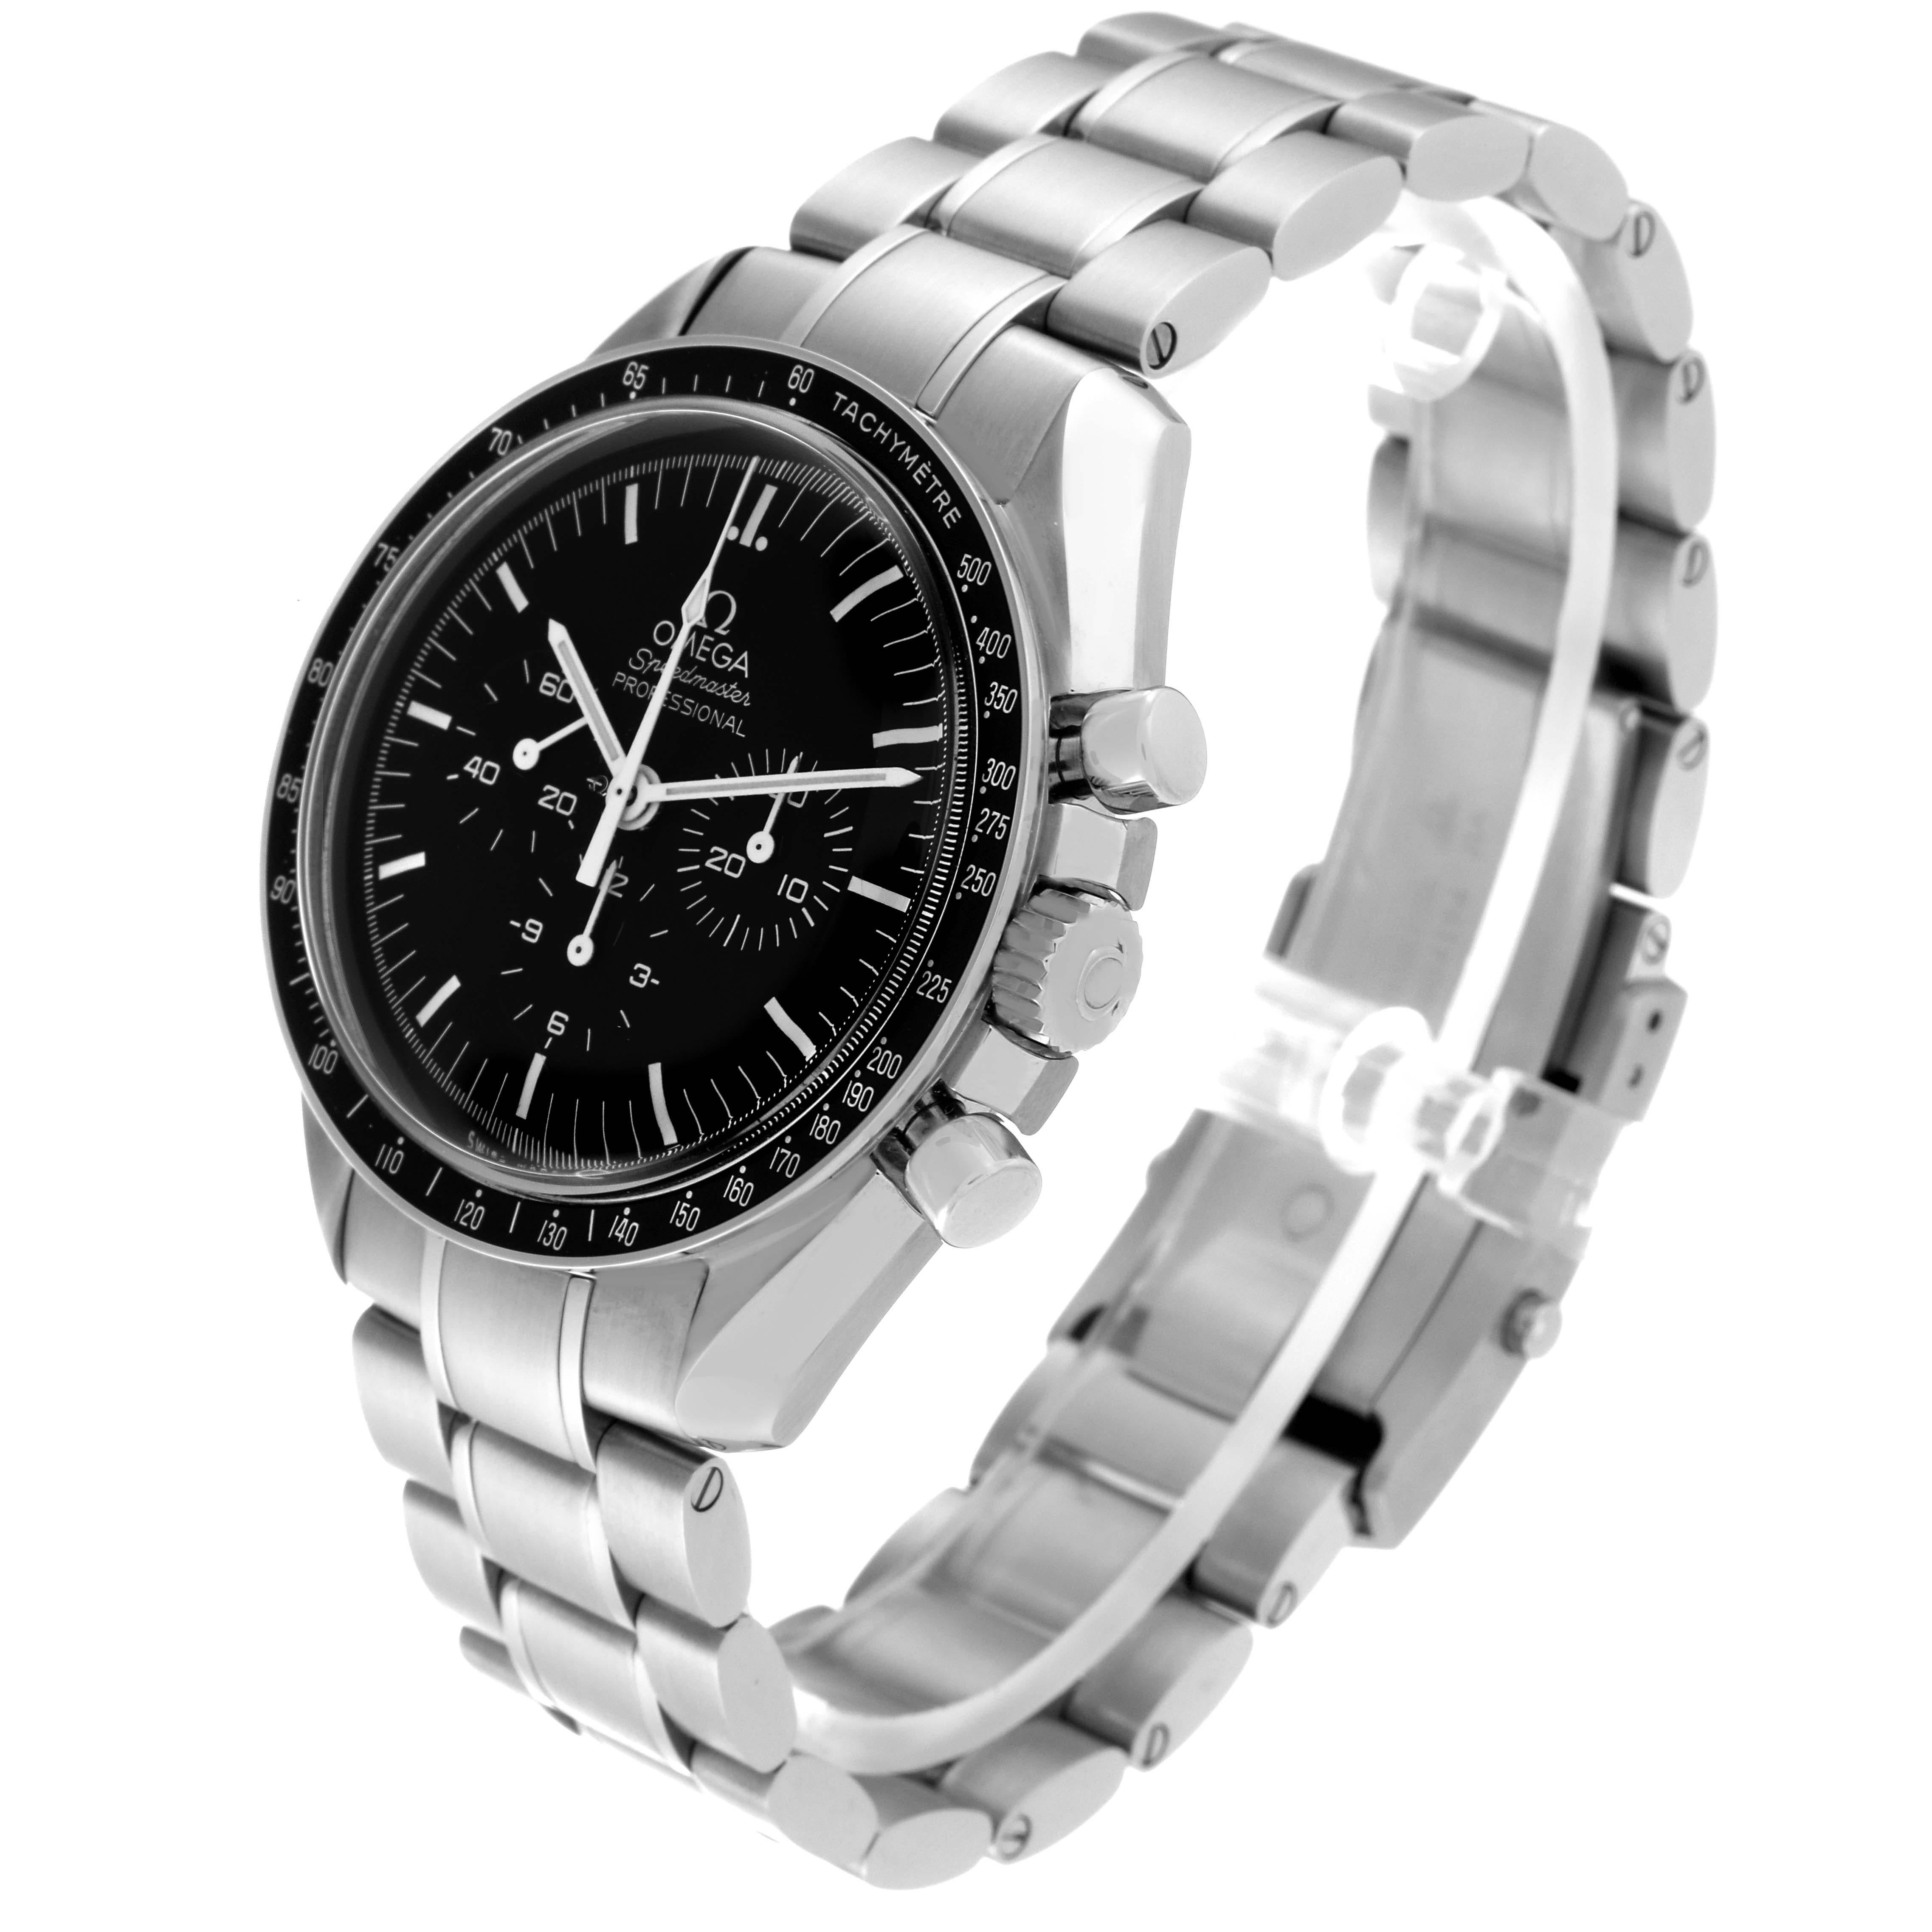 Omega Speedmaster Moonwatch Steel Mens Watch 311.30.42.30.01.005 Box Card. Manual winding chronograph movement. Stainless steel round case 42.0 mm in diameter. Stainless steel bezel with tachymeter function. Hesalite acrylic crystal. Black dial with